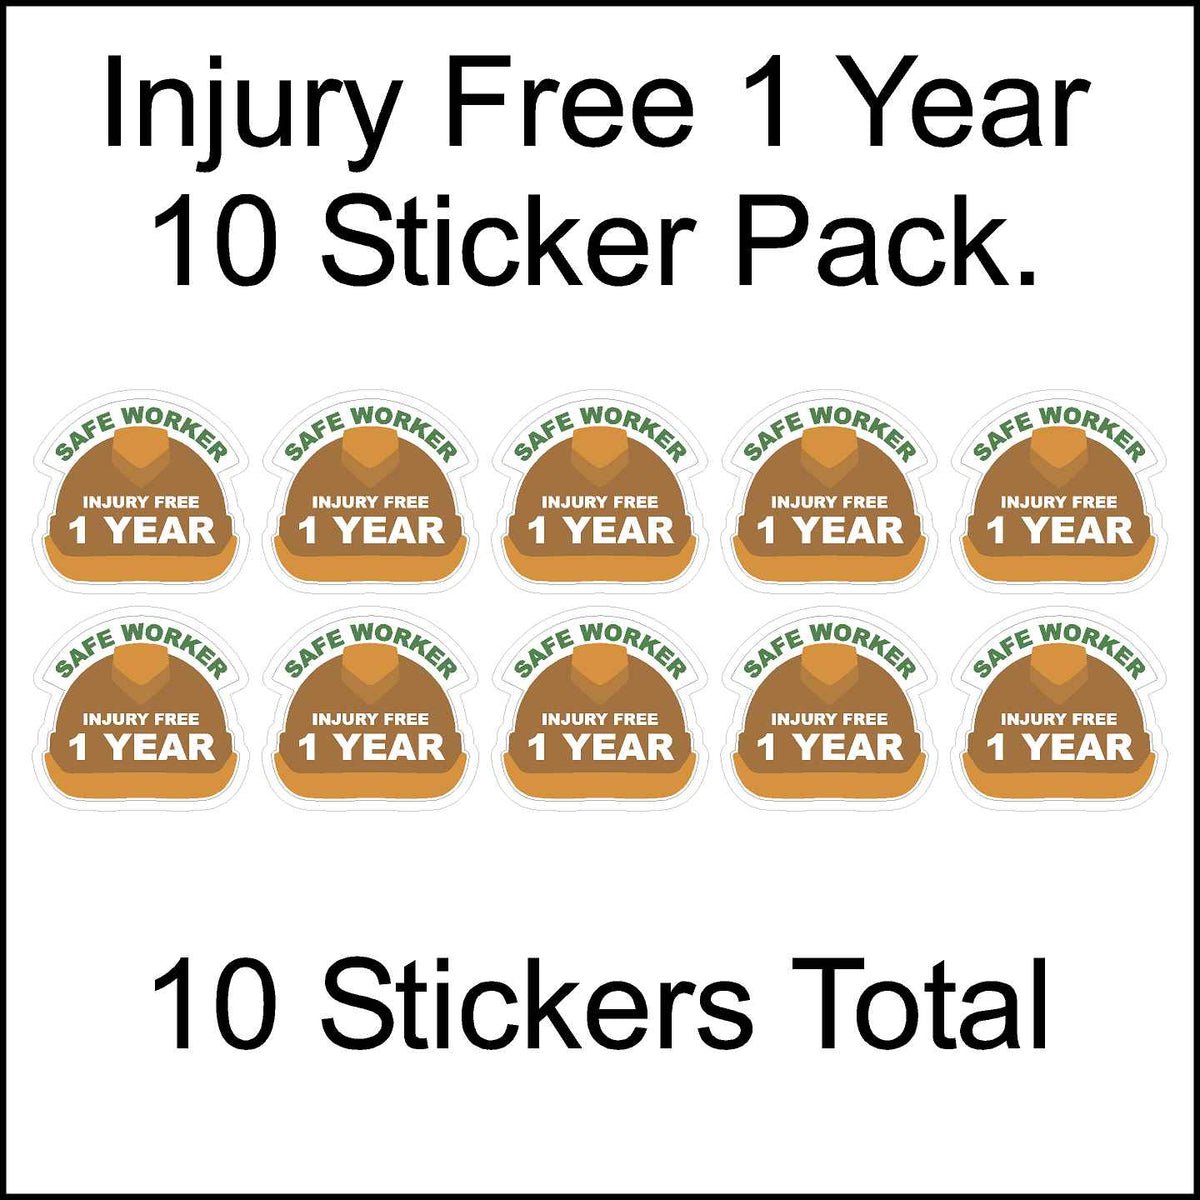 Safe worker injury free one year sticker pack of 10 pieces.